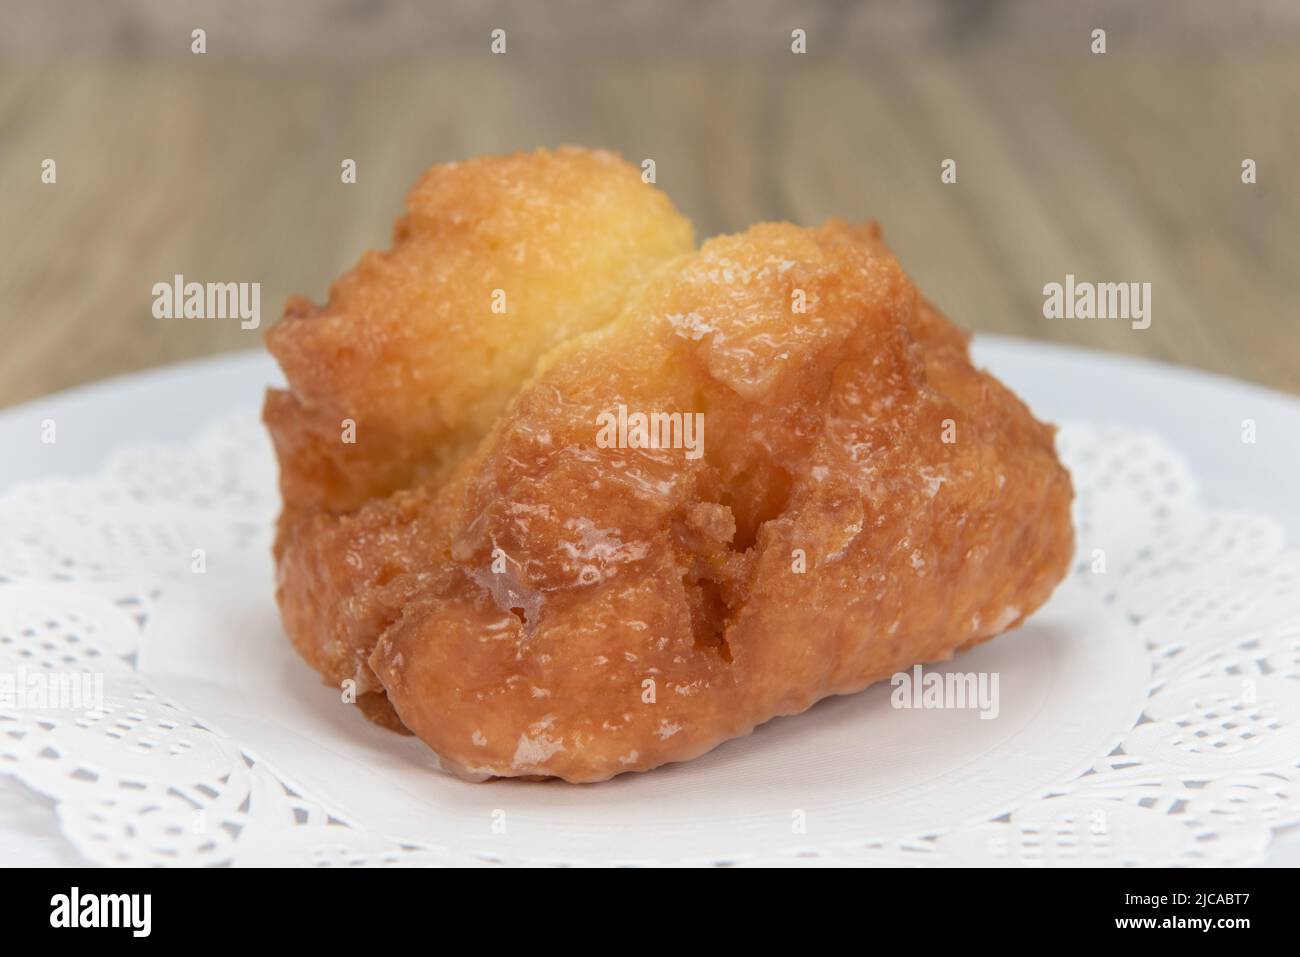 Tempting fresh from the oven buttermilk bar donut from the bakery served on a plate. Stock Photo